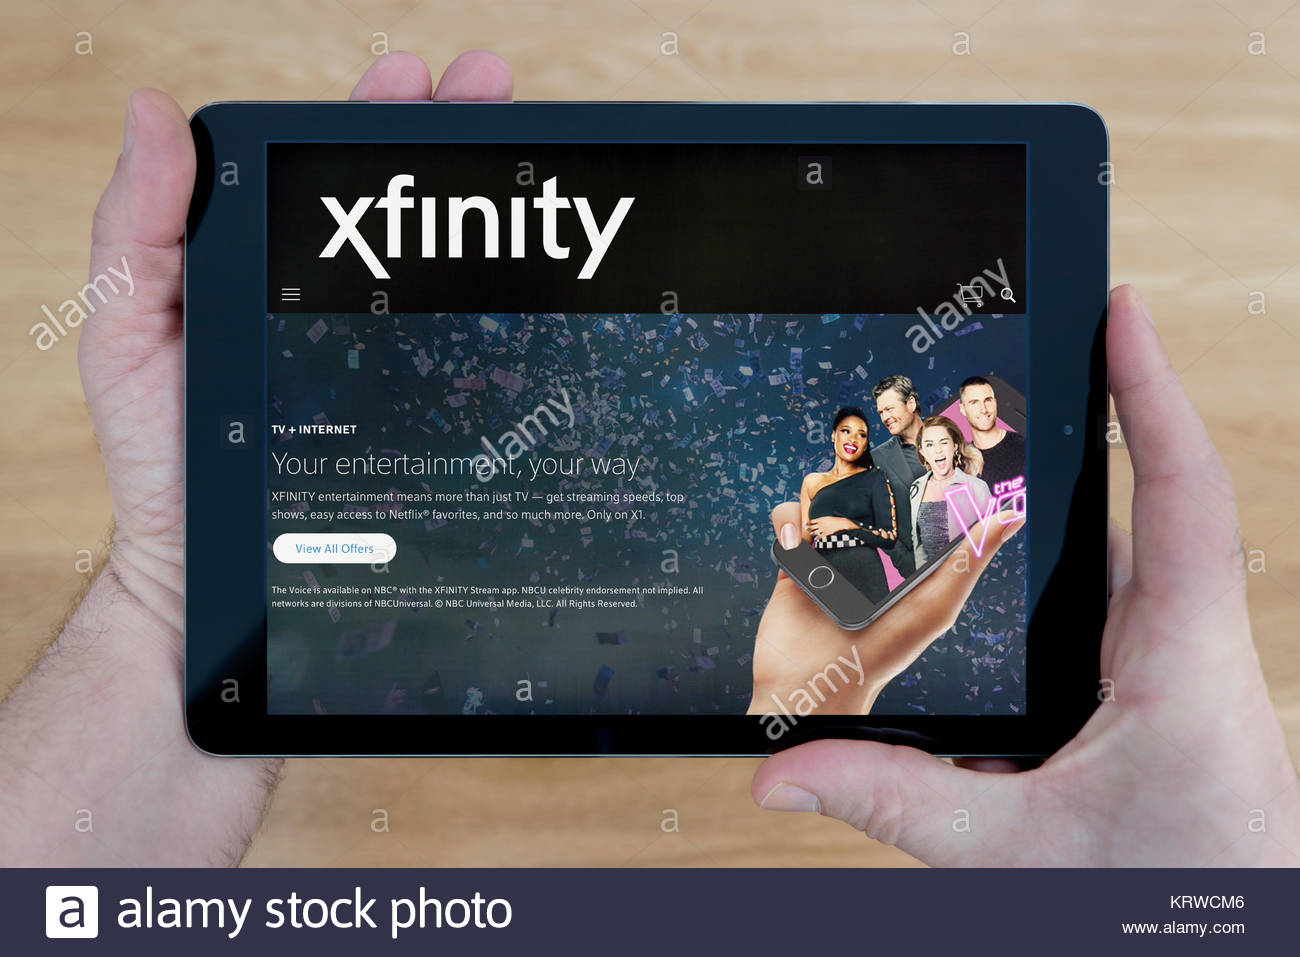 A Man Looks At The Xfinity Website On His iPad Tablet Device Shot